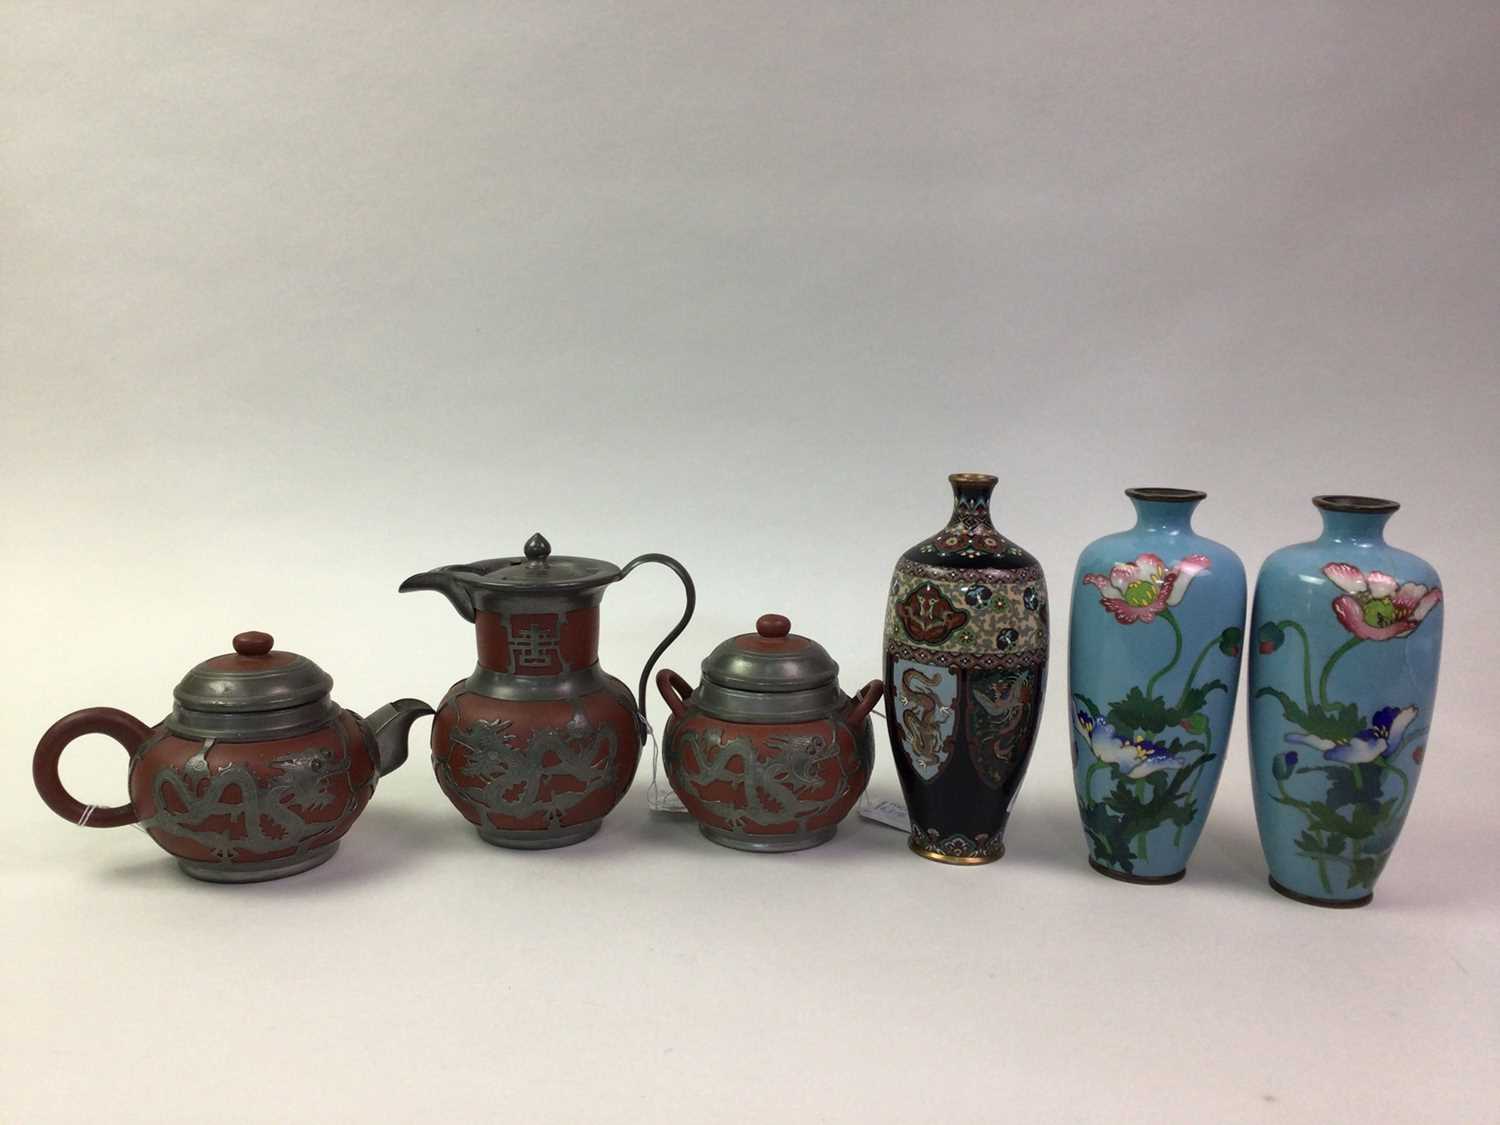 CHINESE PEWTER OVERLAID YIXING TEA SERVICE, ALONG WITH THREE CLOISONNE VASES - Image 2 of 2